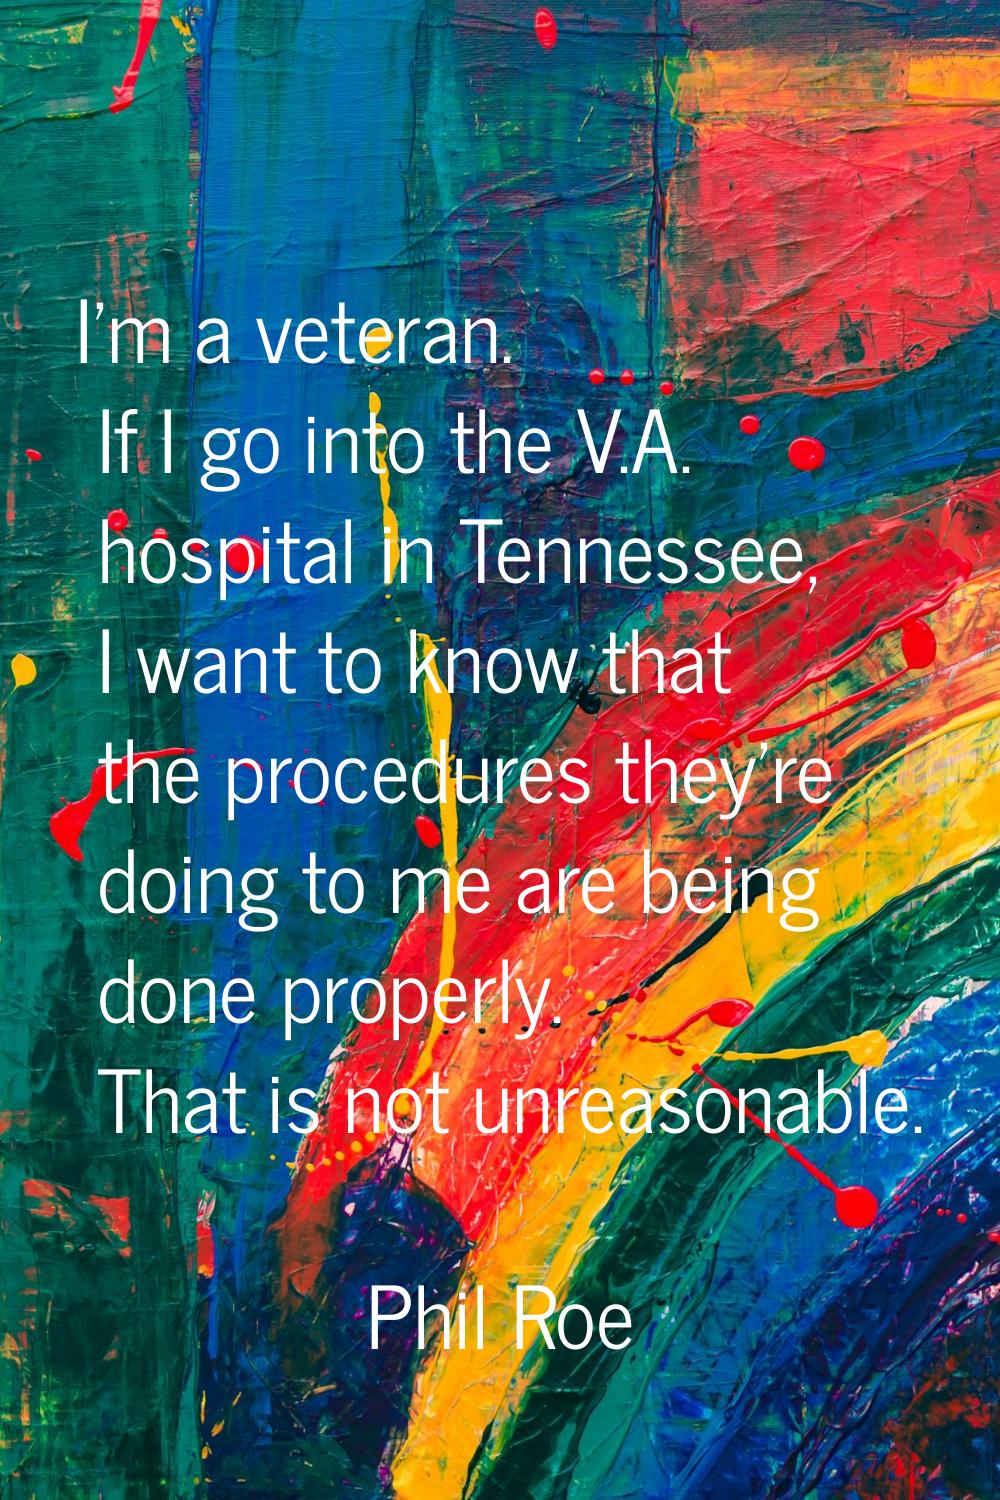 I'm a veteran. If I go into the V.A. hospital in Tennessee, I want to know that the procedures they